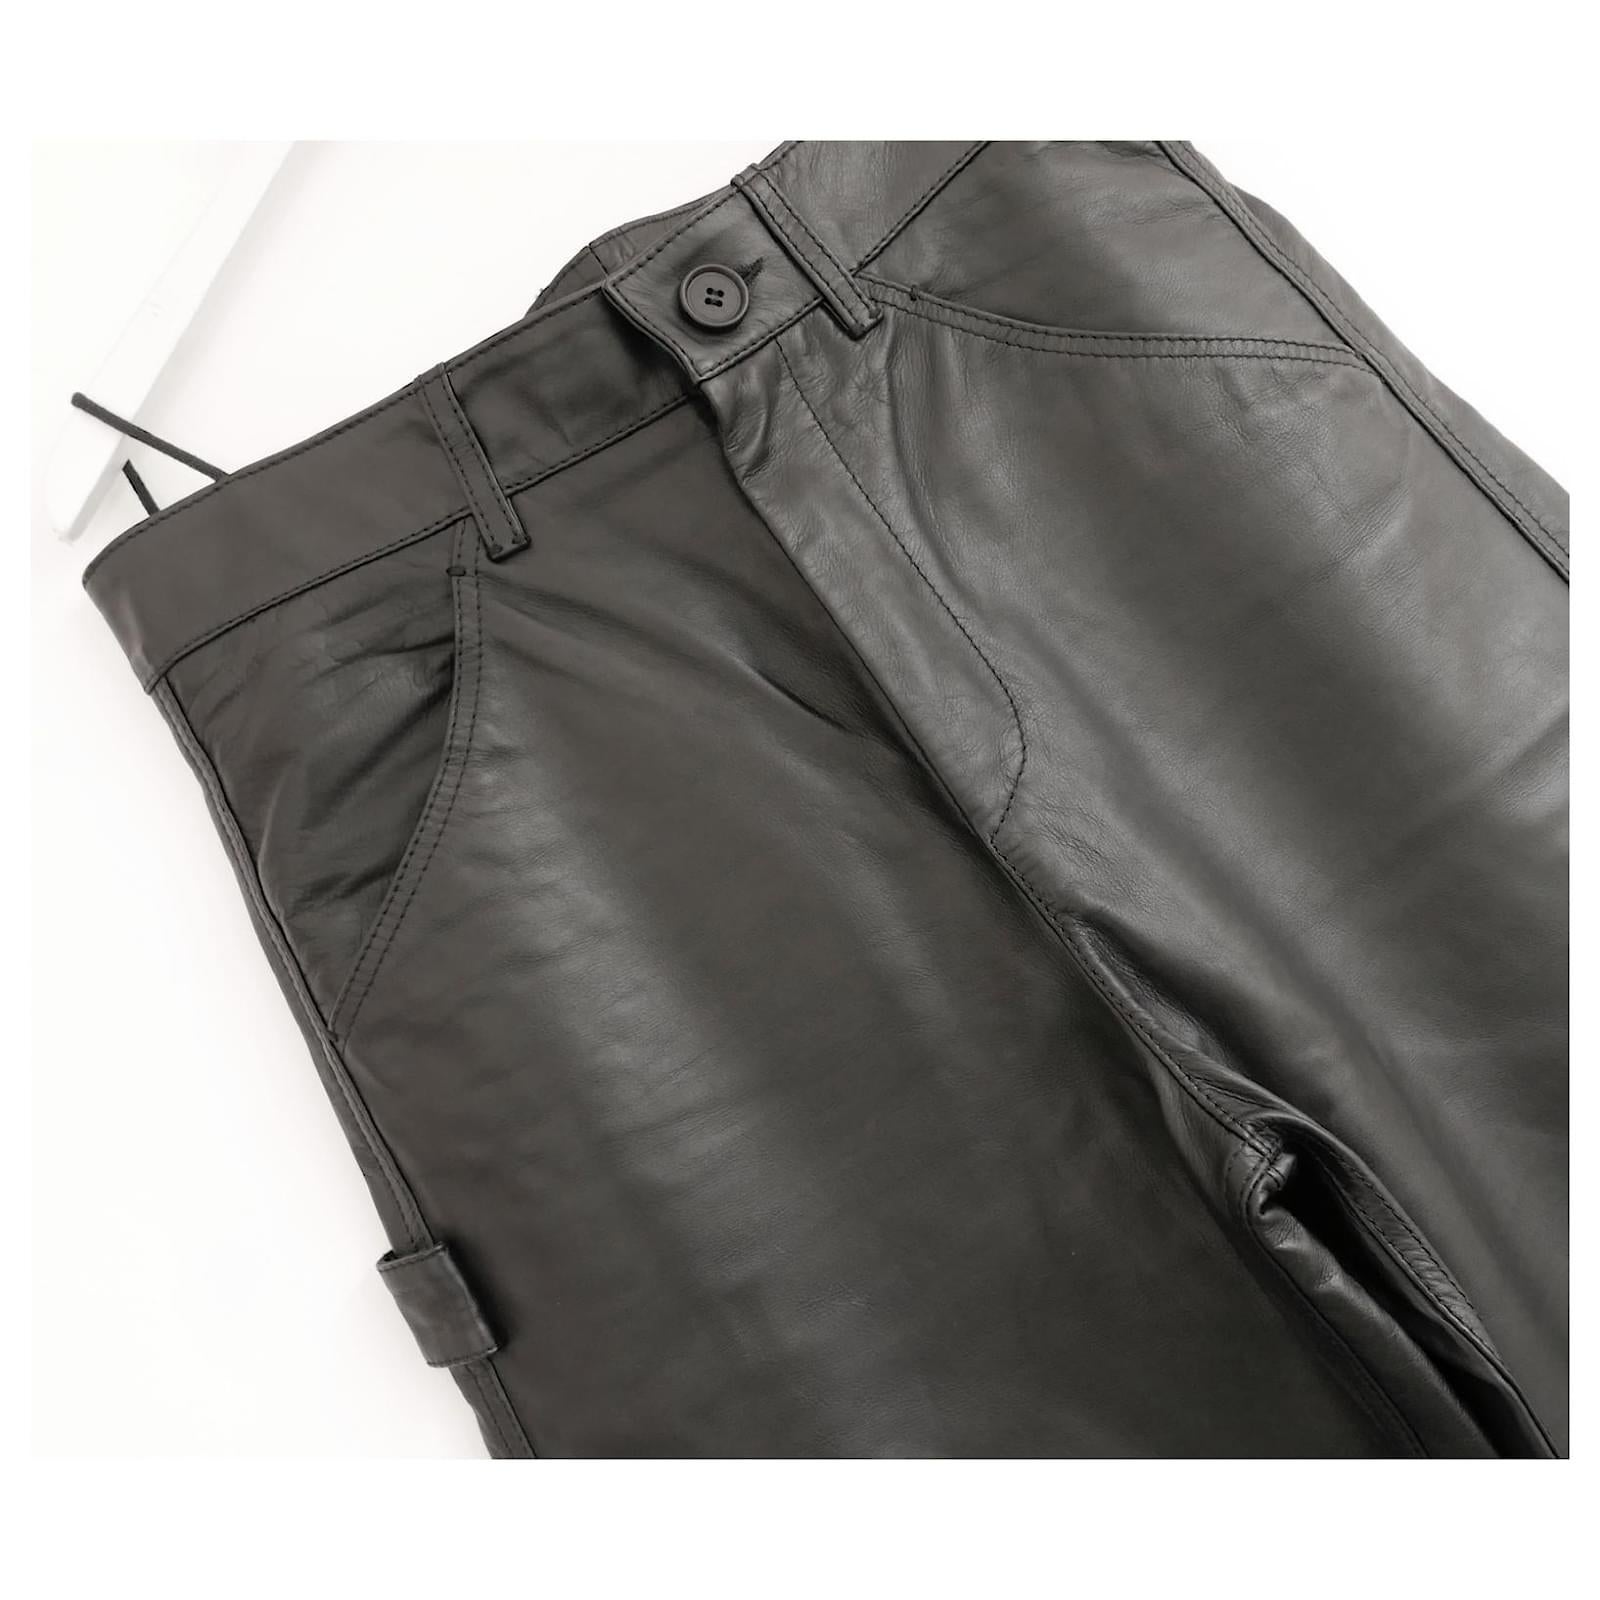 Stunning Petar Petrov leather cargo pants from the Spring 2022 collection (look 22). Bought for £1700 and worn once. Made from soft black lamb’s leather, they have a super slouchy cut with curved leg seams, feature pockets and side strap and wide